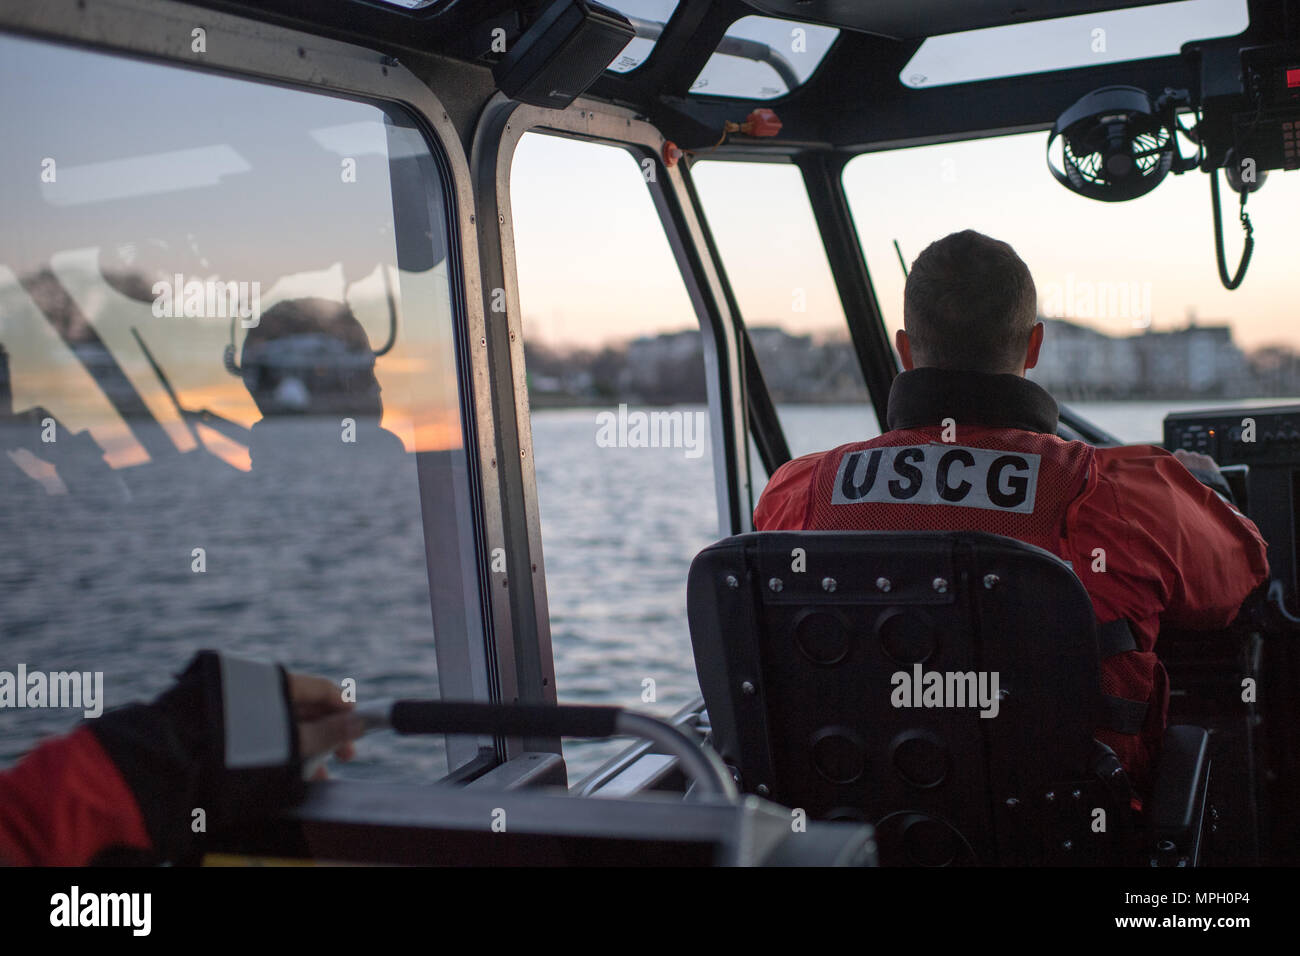 Petty Officer 3rd Class Bryan Freeman, a boatswain's mate from Coast Guard Station Manasquan Inlet, pilots a 29-foot Response Boat-Small during an evening patrol on Manasquan River, Feb 23, 2017. U.S. Coast Guard photo by Auxiliarist David Lau. Stock Photo